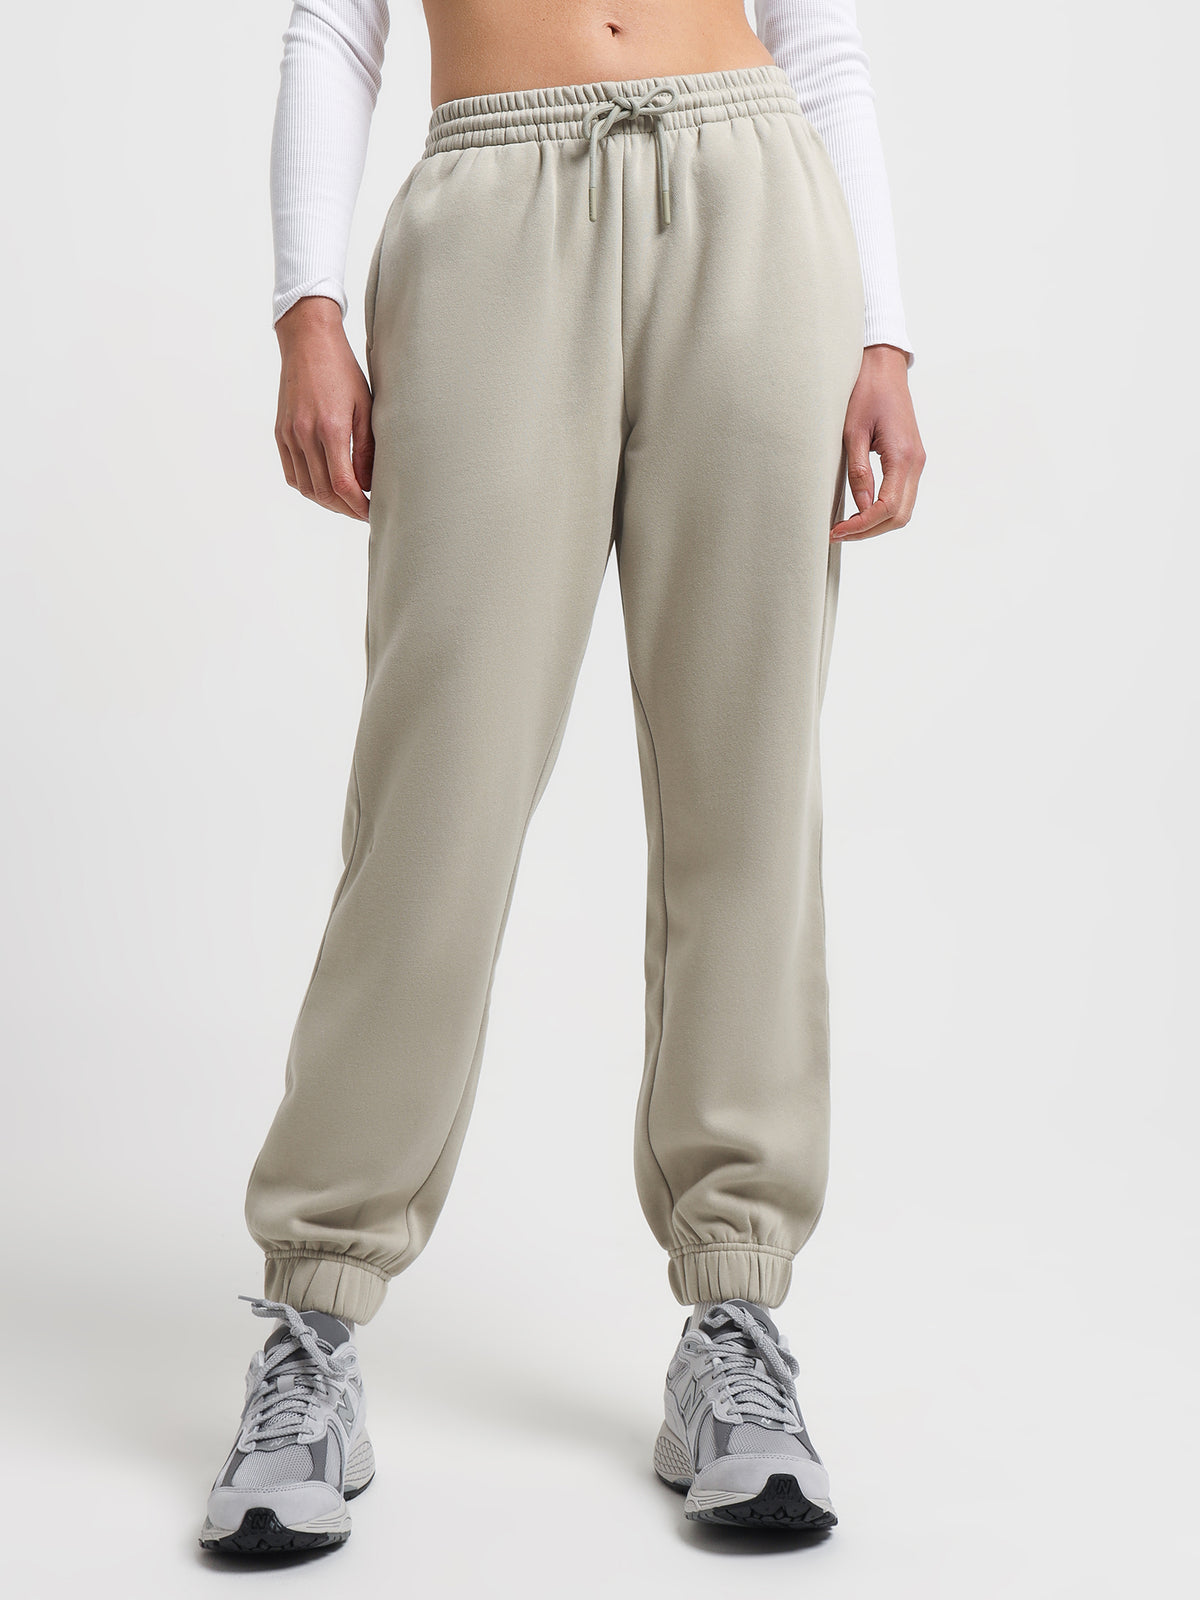 Carter Curated Track Pants in Artichoke